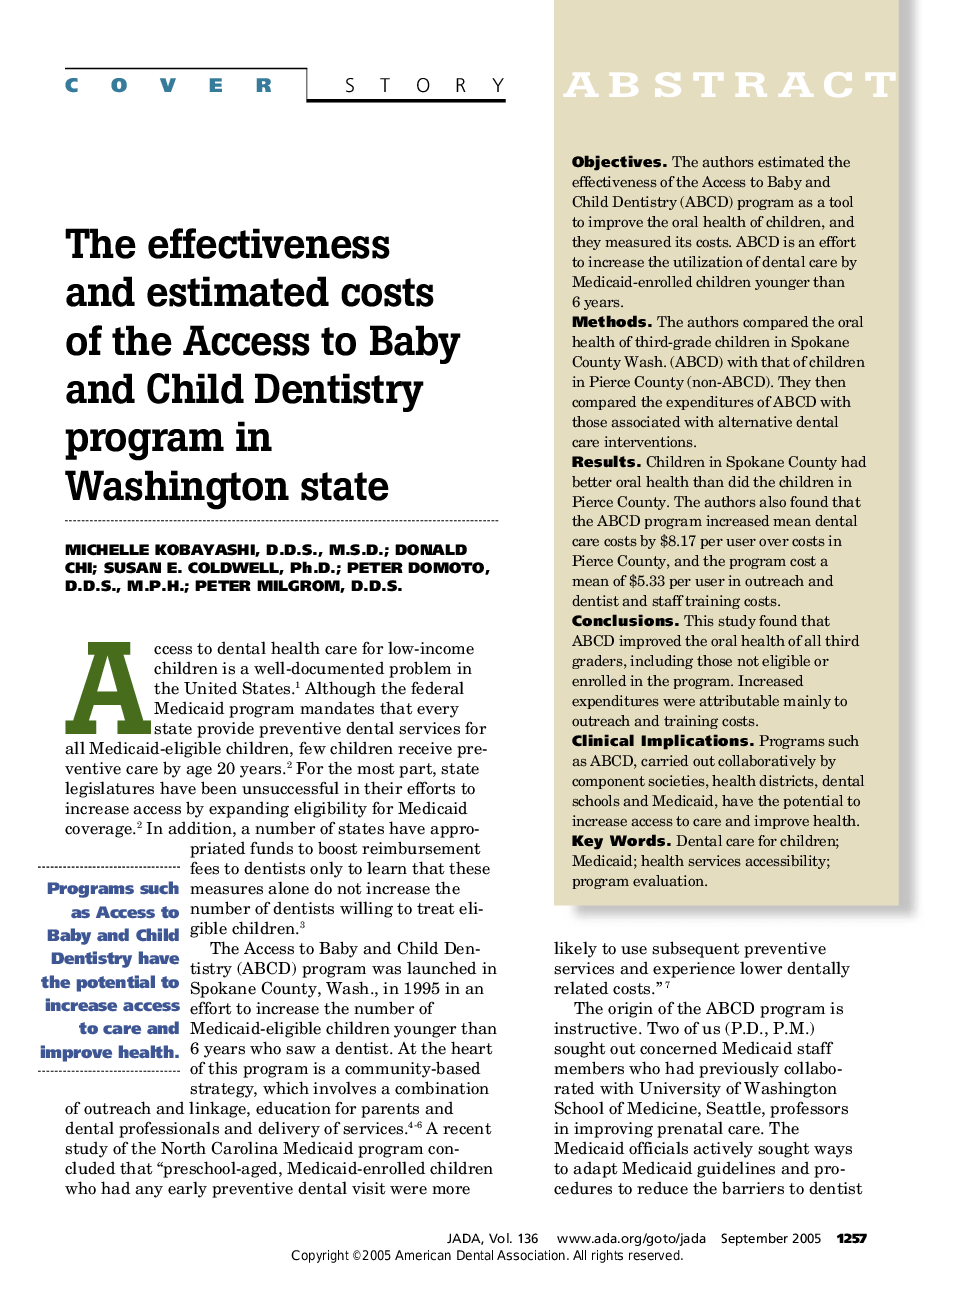 The effectiveness and estimated costs of the Access to Baby and Child Dentistry program in Washington state